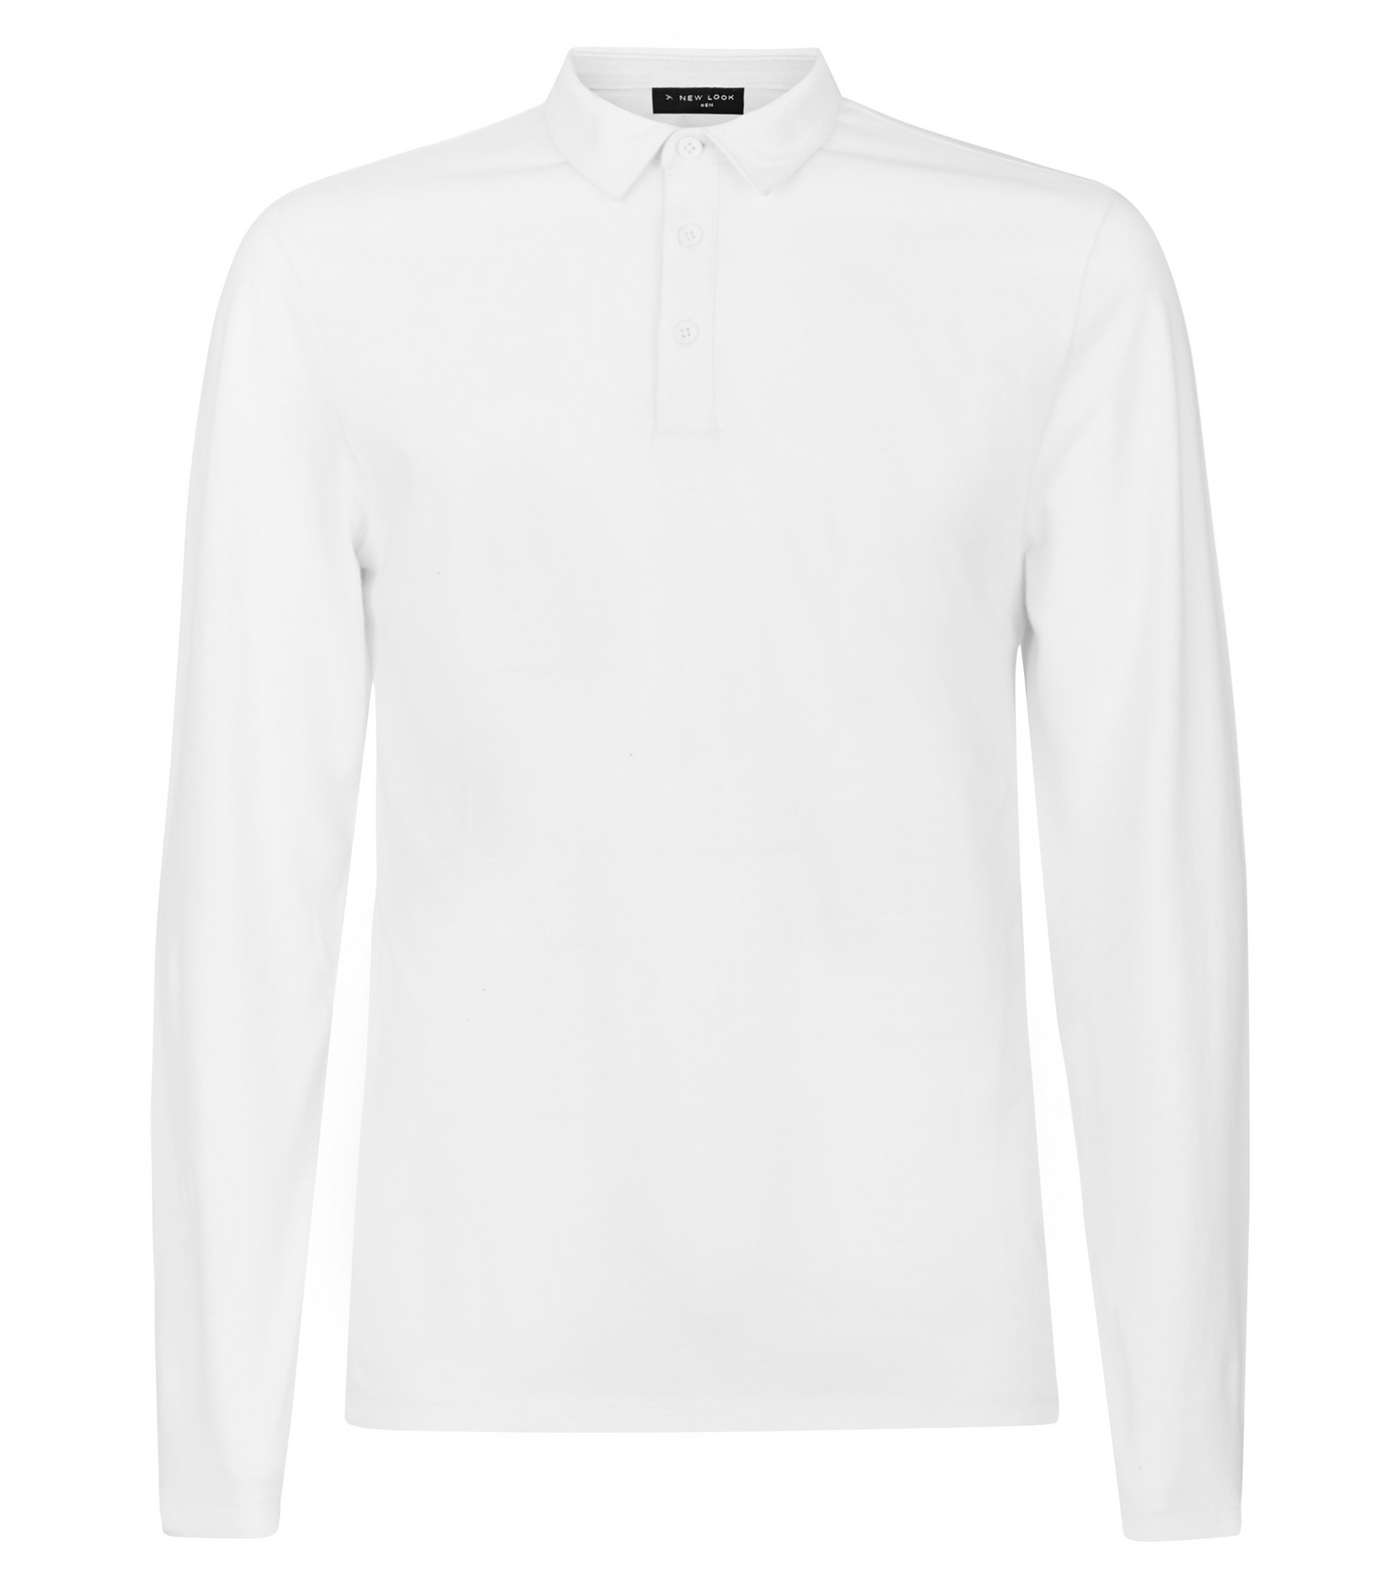 White Muscle Fit Long Sleeve Polo Shirt Image 4